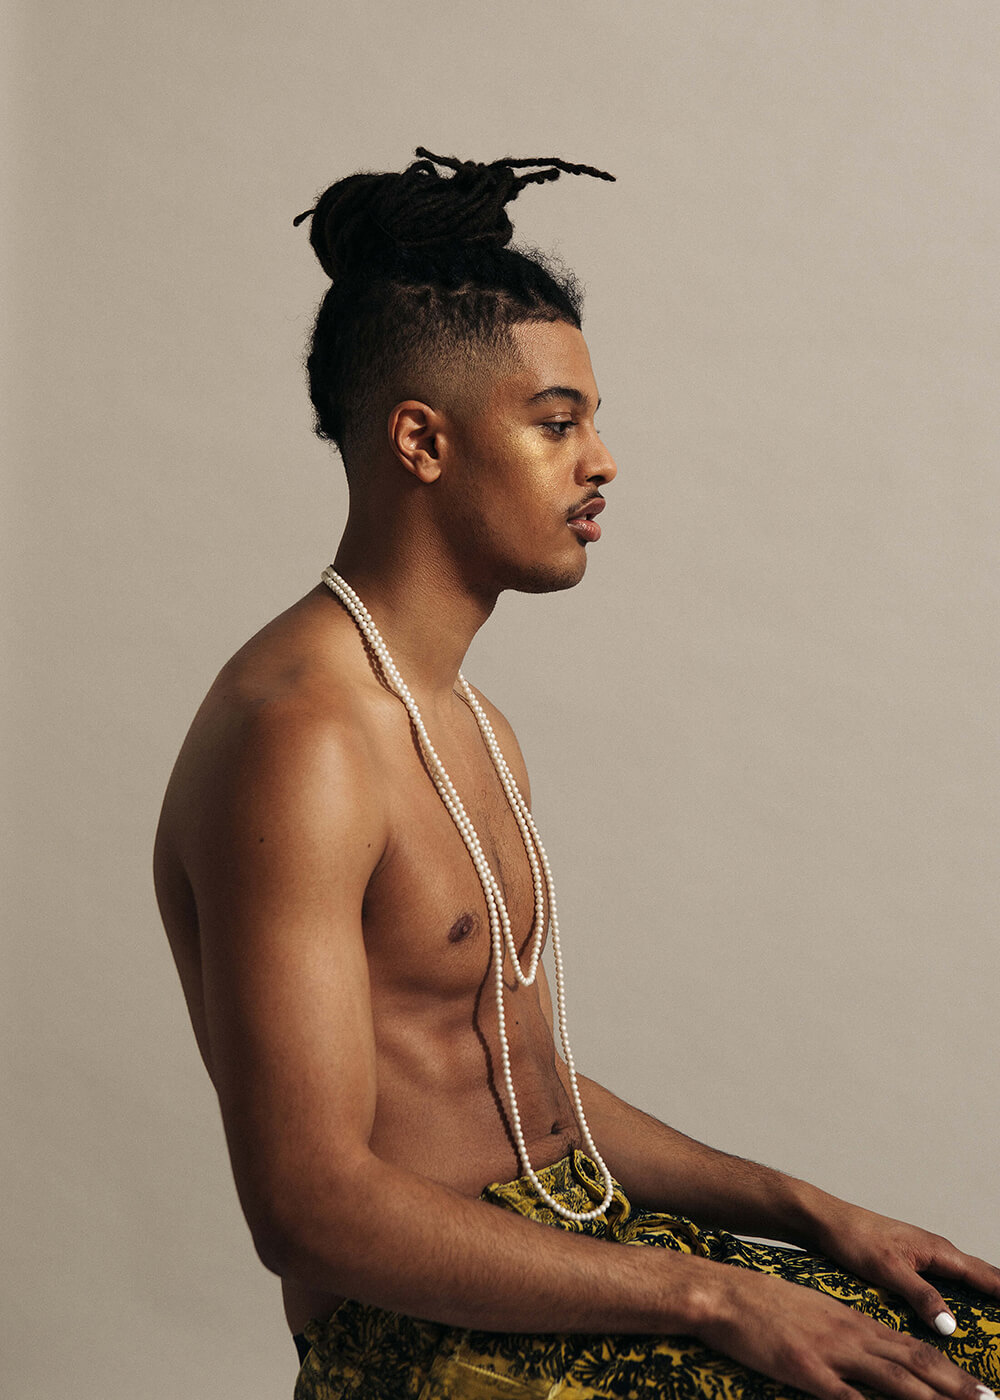 A editorial studio portrait of a shirtless man sitting wearing beads